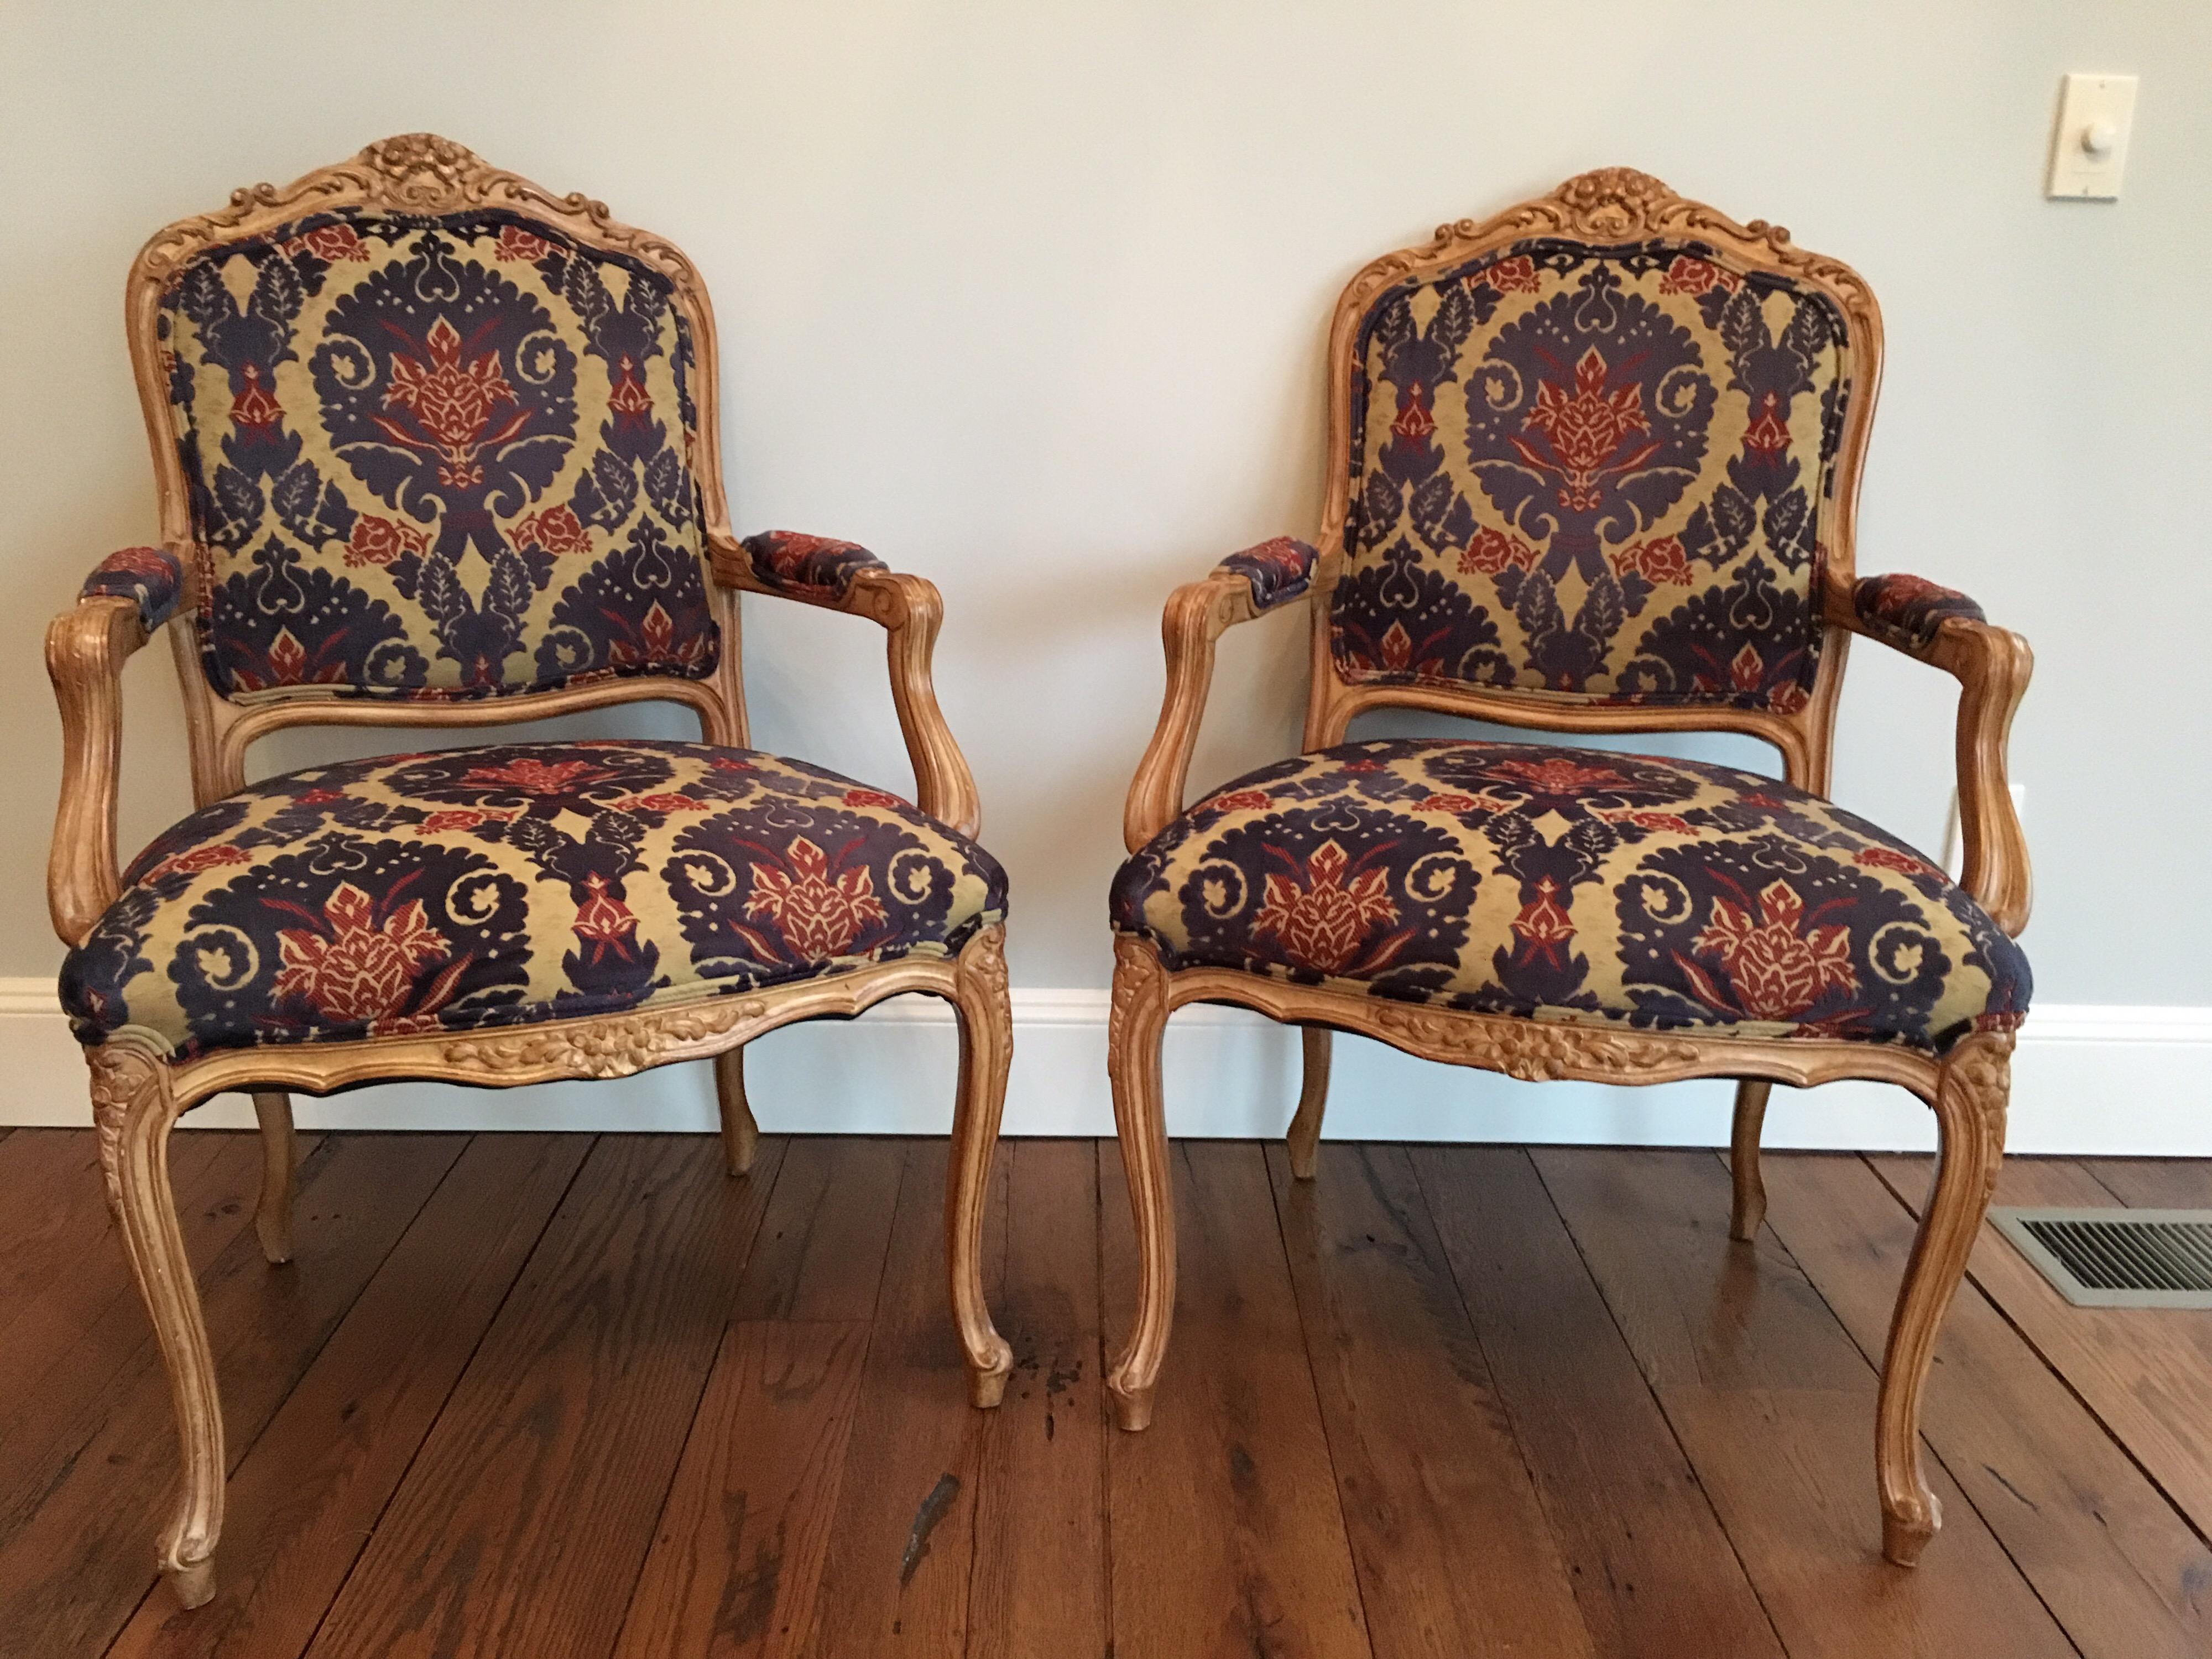 Pair of Louis XVI style armchairs covered in cut velvet fabric. Carved foliage and shell motif at the top. Very good condition. Two small ink stains on seat of one chair.